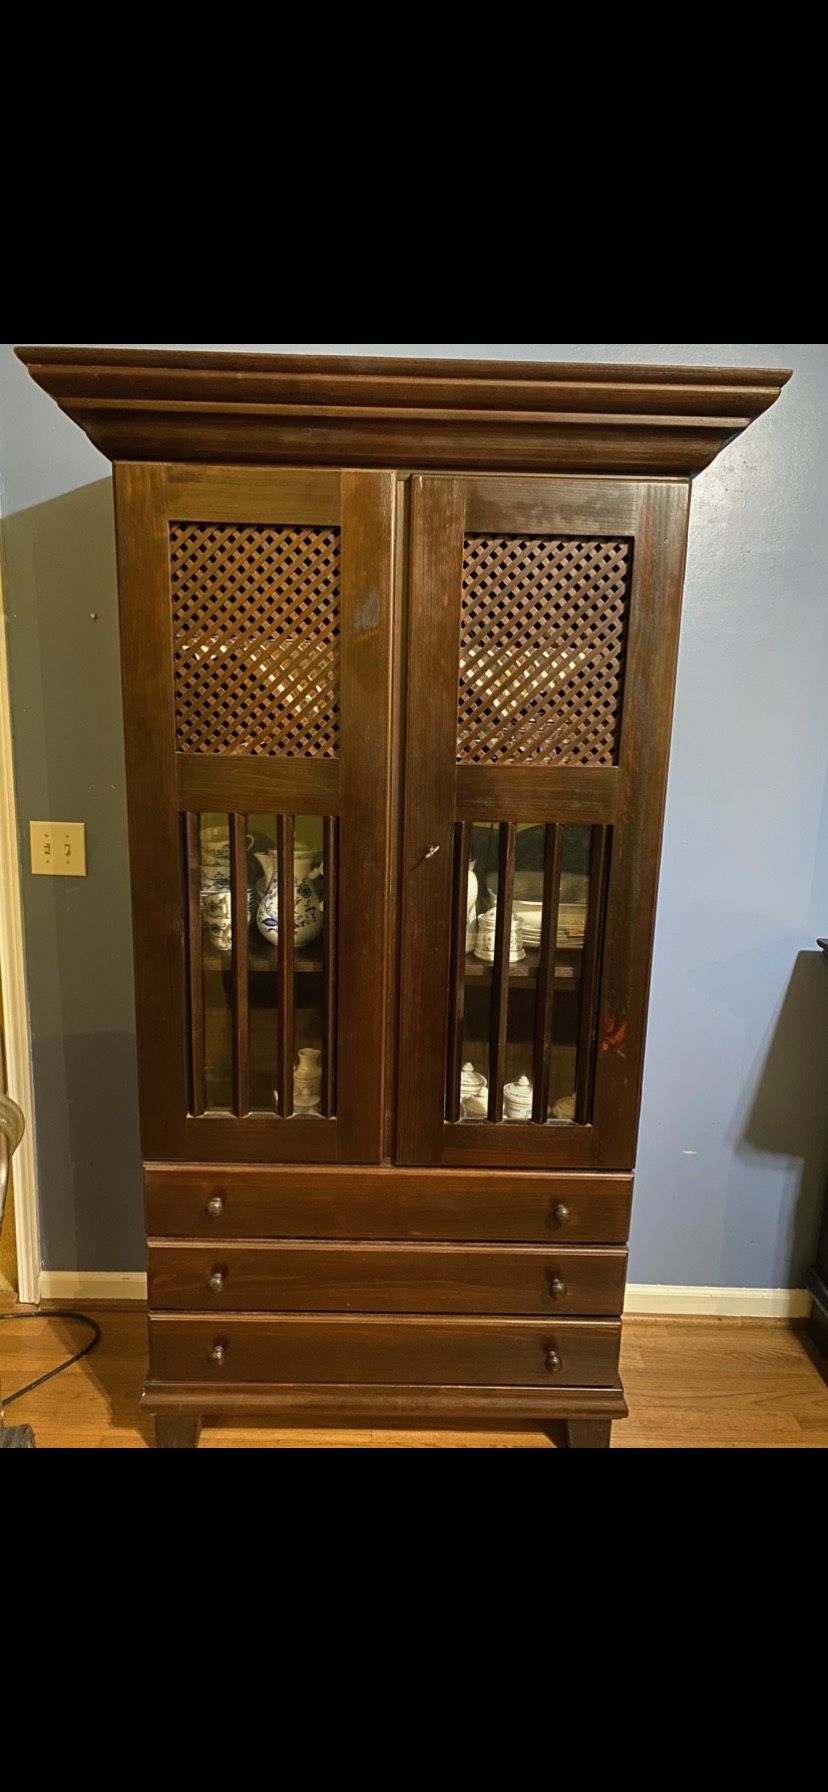 AUTHENTIC GERMAN WOOD CABINETS (MADE IN EARLY 90s)